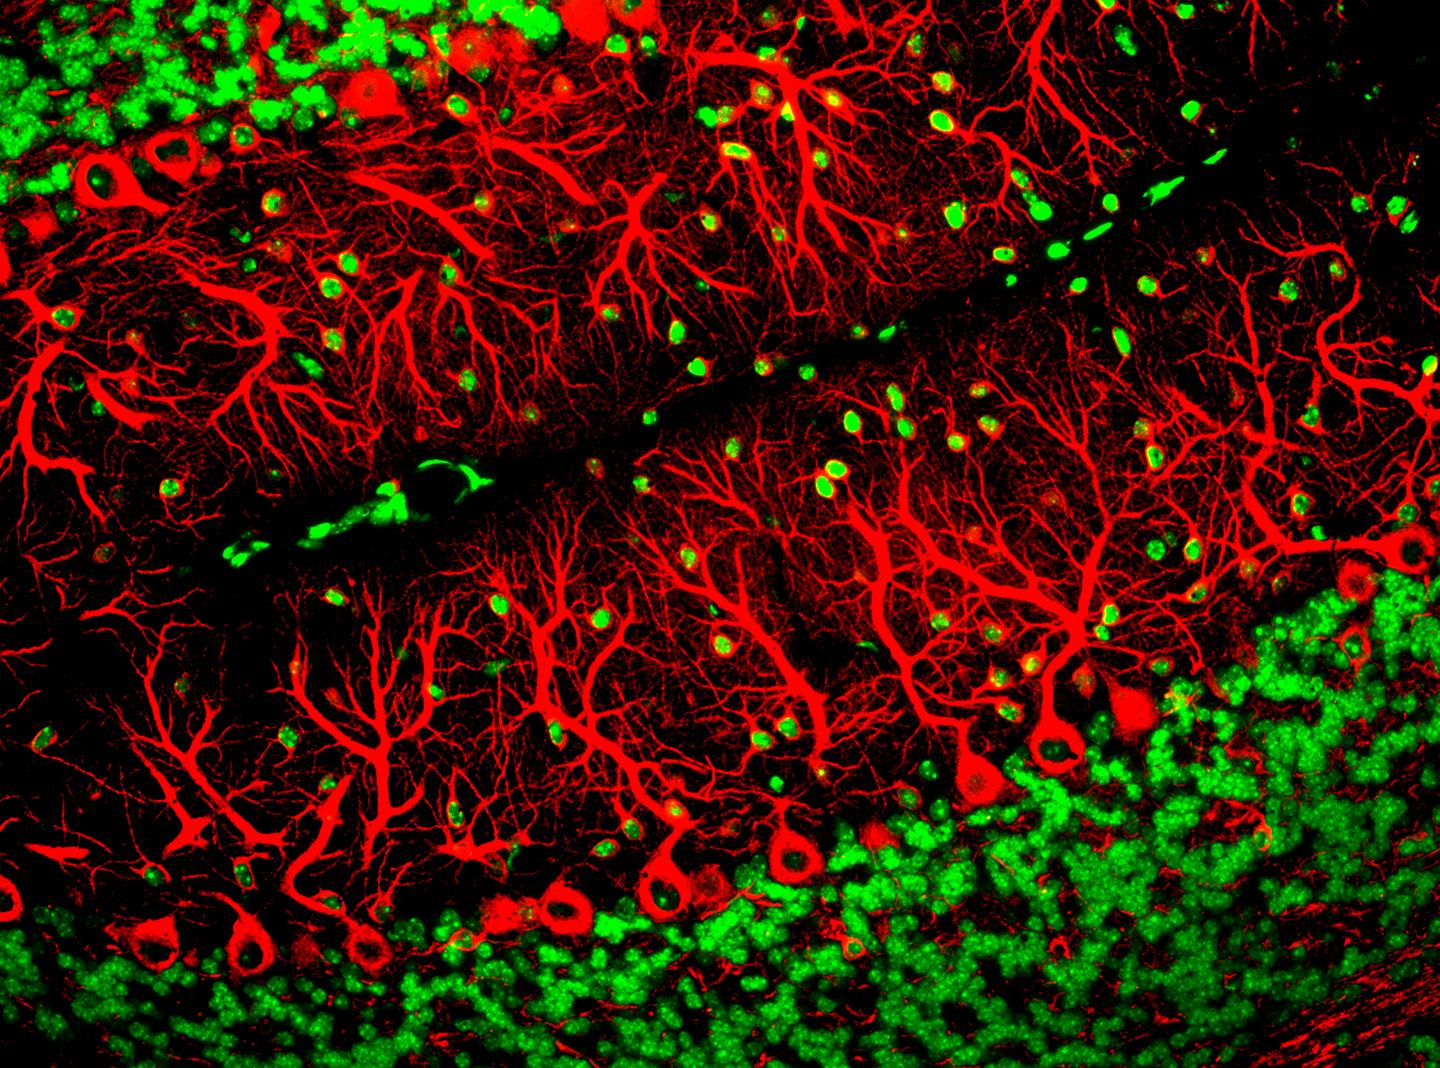 Purkinje cells are one of the main cell types in the brain